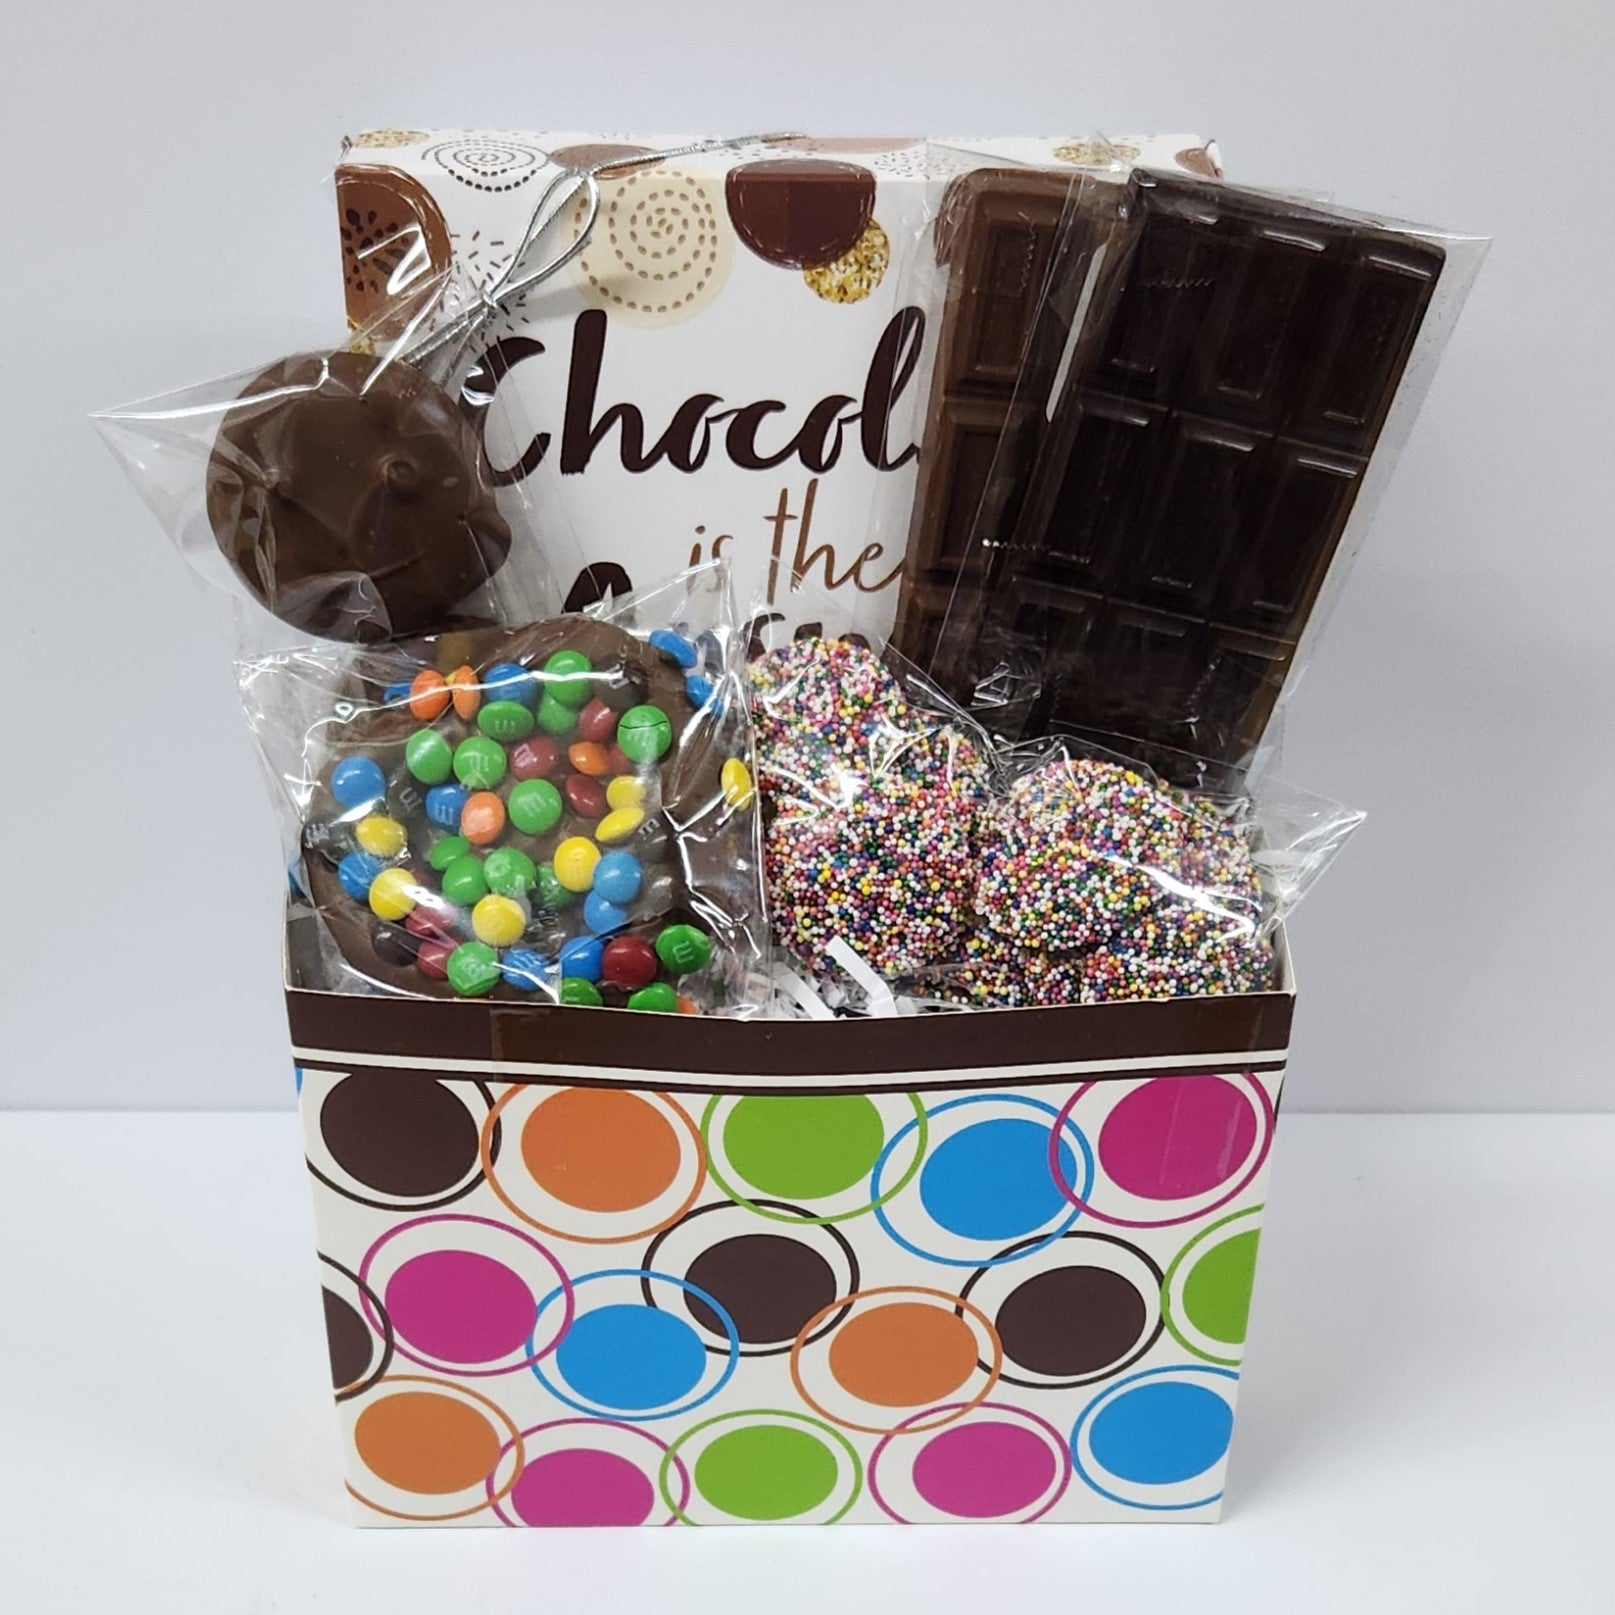 Chocolate is the Answer Gift Basket includes milk & dark chocolate candy bars, milk chocolate covered Oreos, milk chocolate nonpareils, a milk chocolate covered pretzels coated in mini M & M's and a 16 piece assortment of caramels, truffles and meltaways